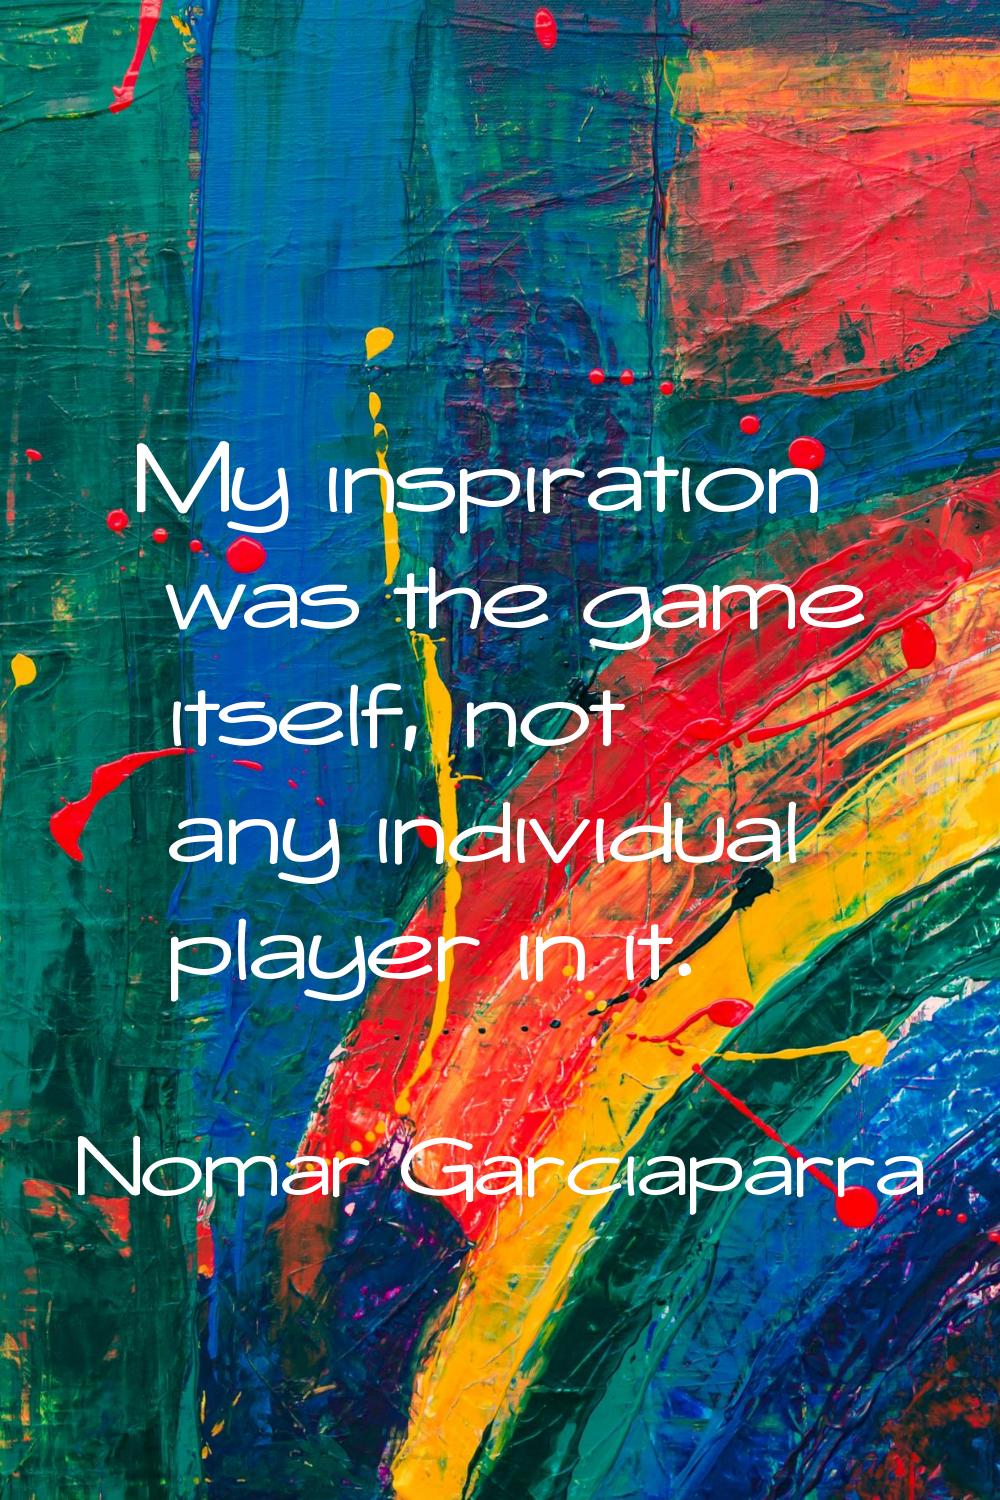 My inspiration was the game itself, not any individual player in it.